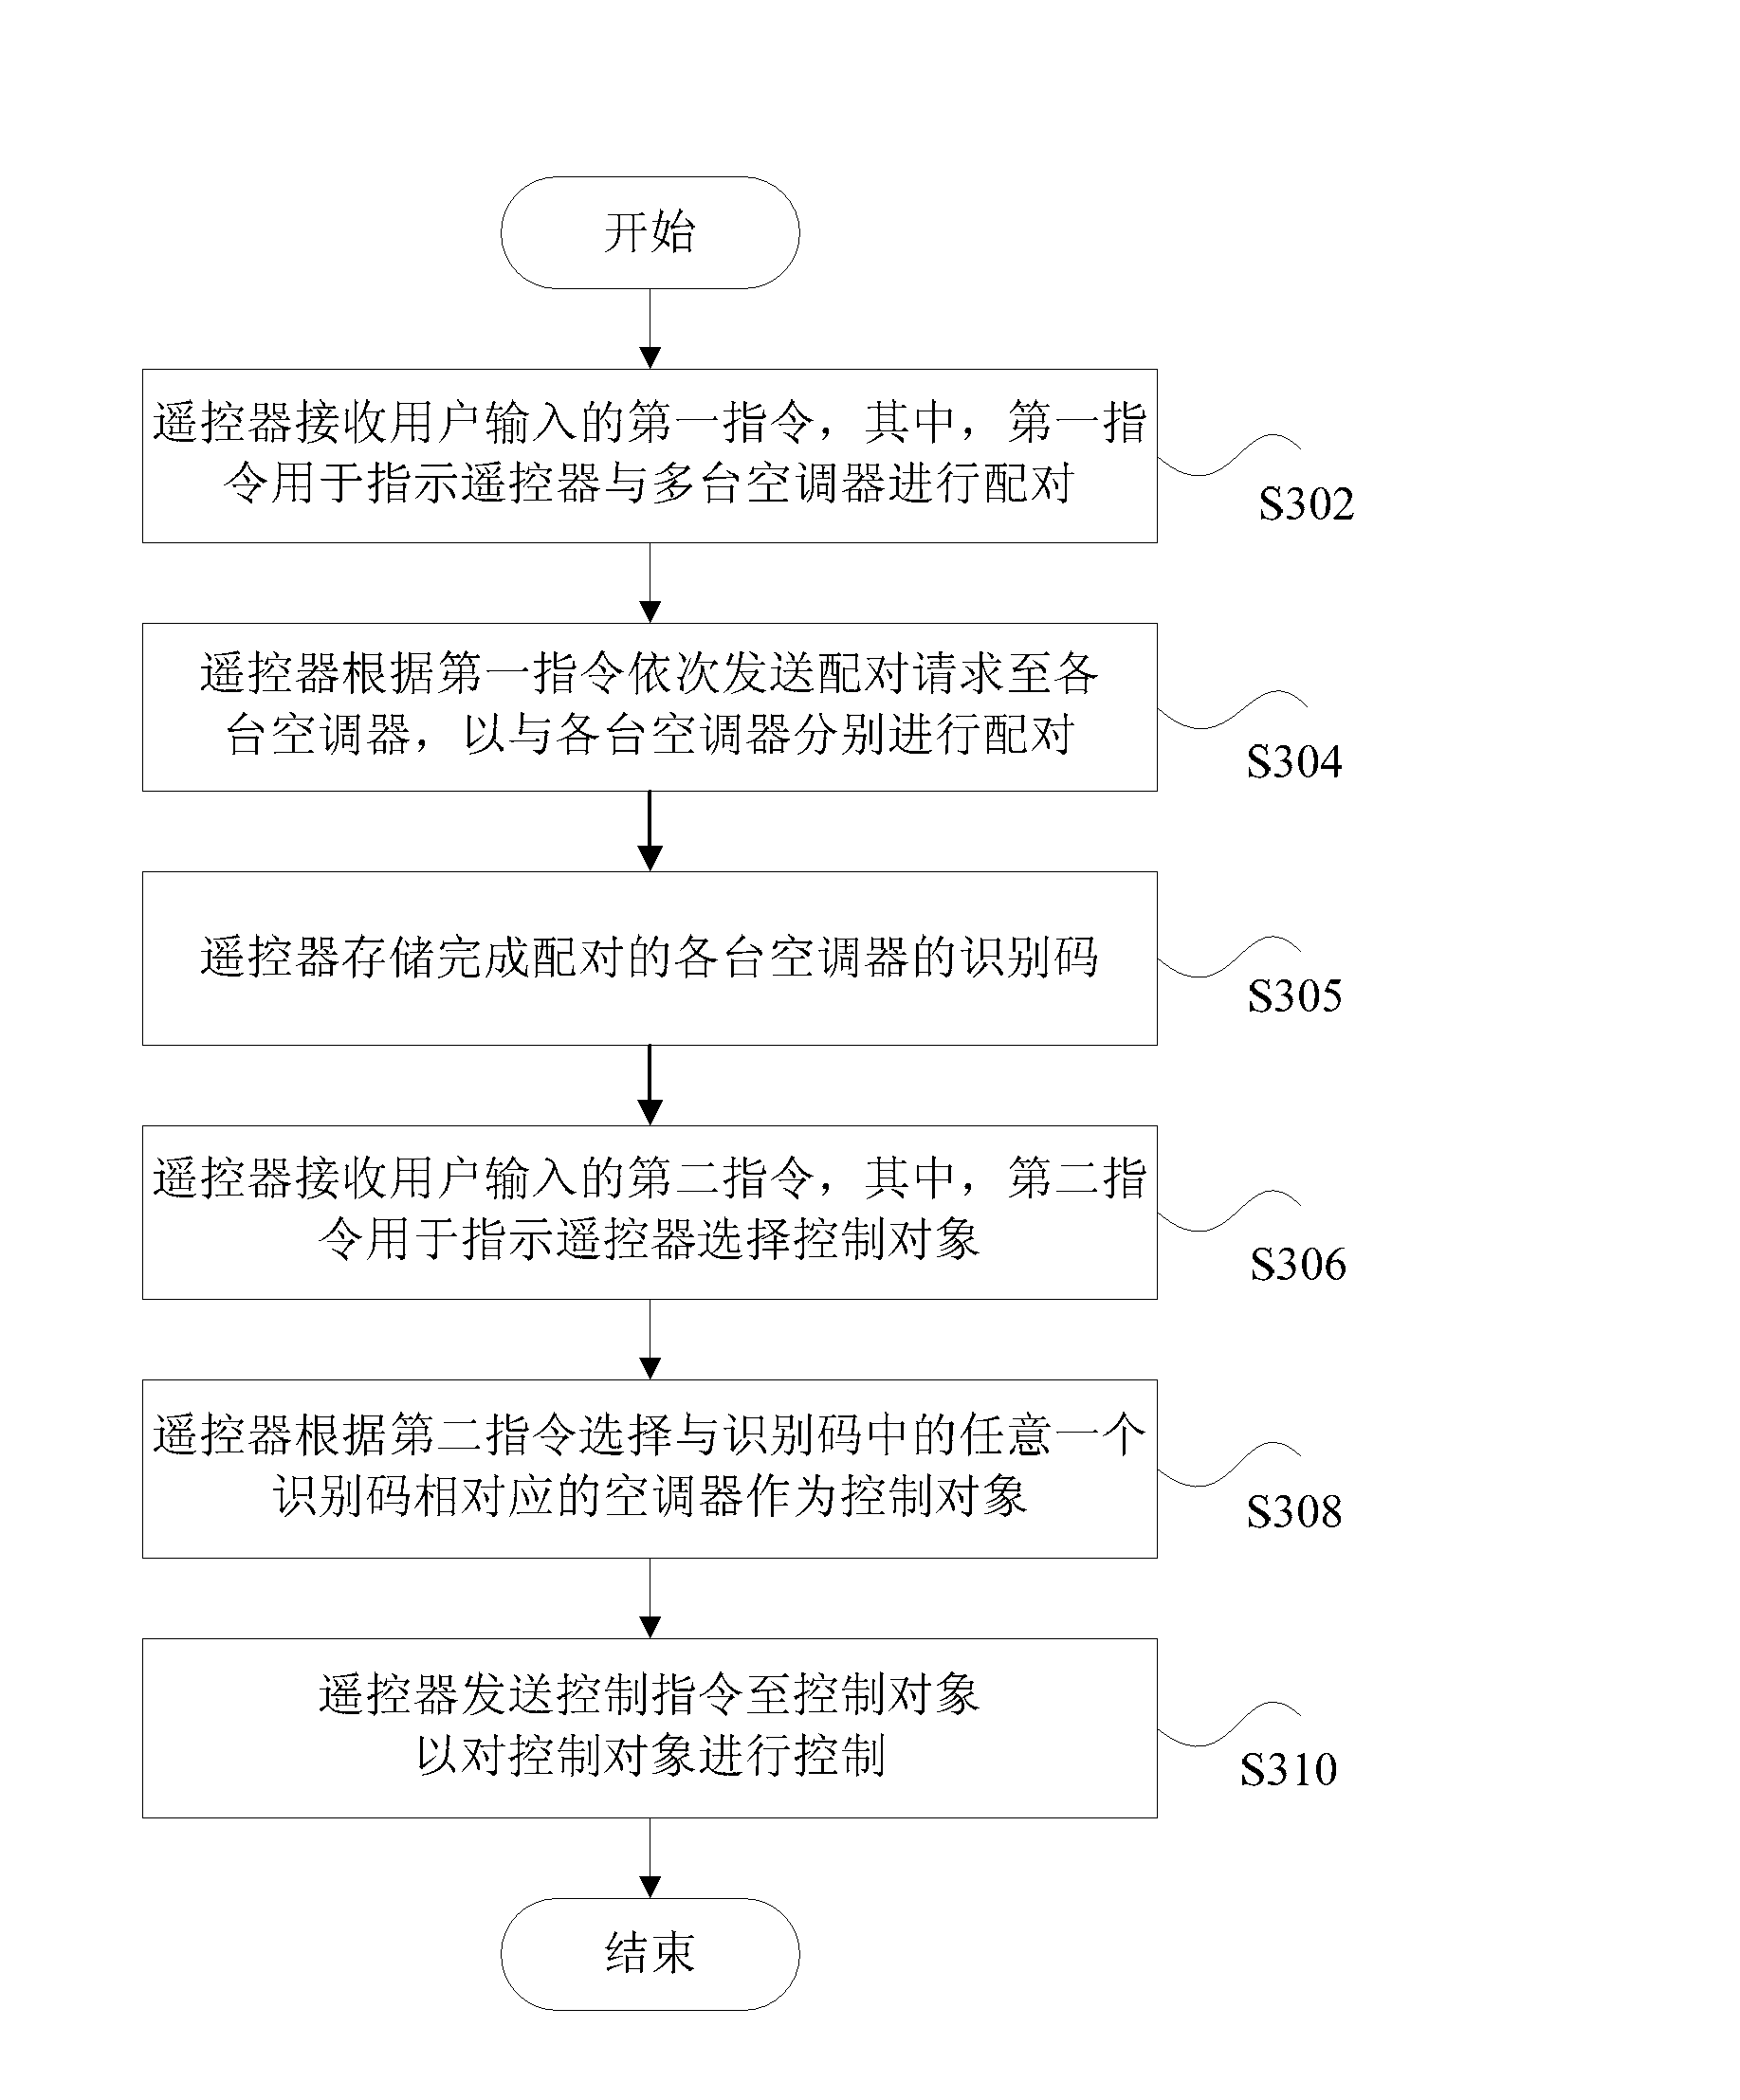 Method and system for controlling a plurality of air conditioners, remote controls and air conditioners